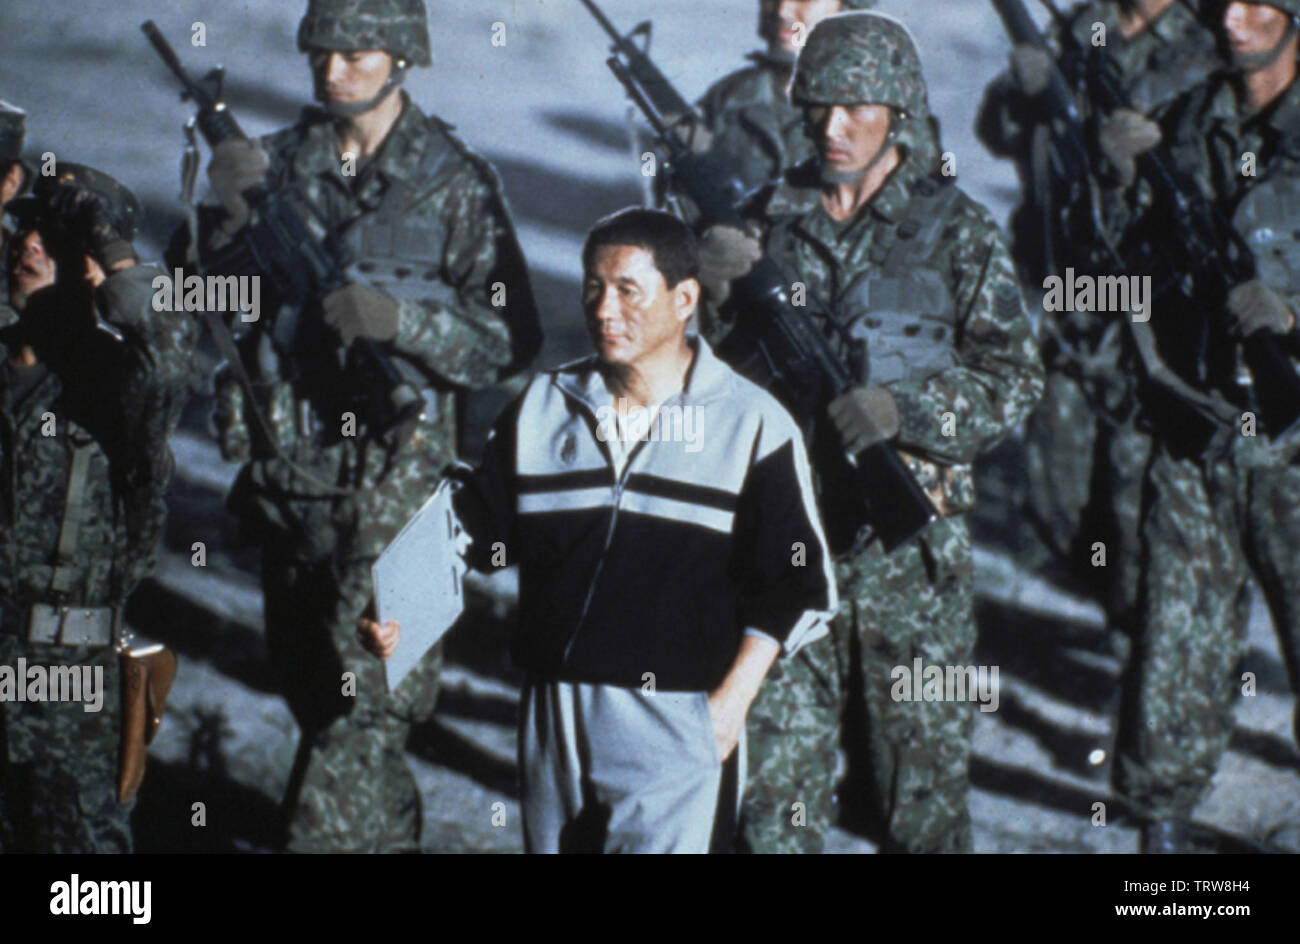 TAKESHI KITANO in BATTLE ROYALE (2000) -Original title: BATORU ROWAIARU-. Copyright: Editorial use only. No merchandising or book covers. This is a publicly distributed handout. Access rights only, no license of copyright provided. Only to be reproduced in conjunction with promotion of this film. Credit: BATTLE ROYALE PRODUCTION COMMITTEE / Album Stock Photo